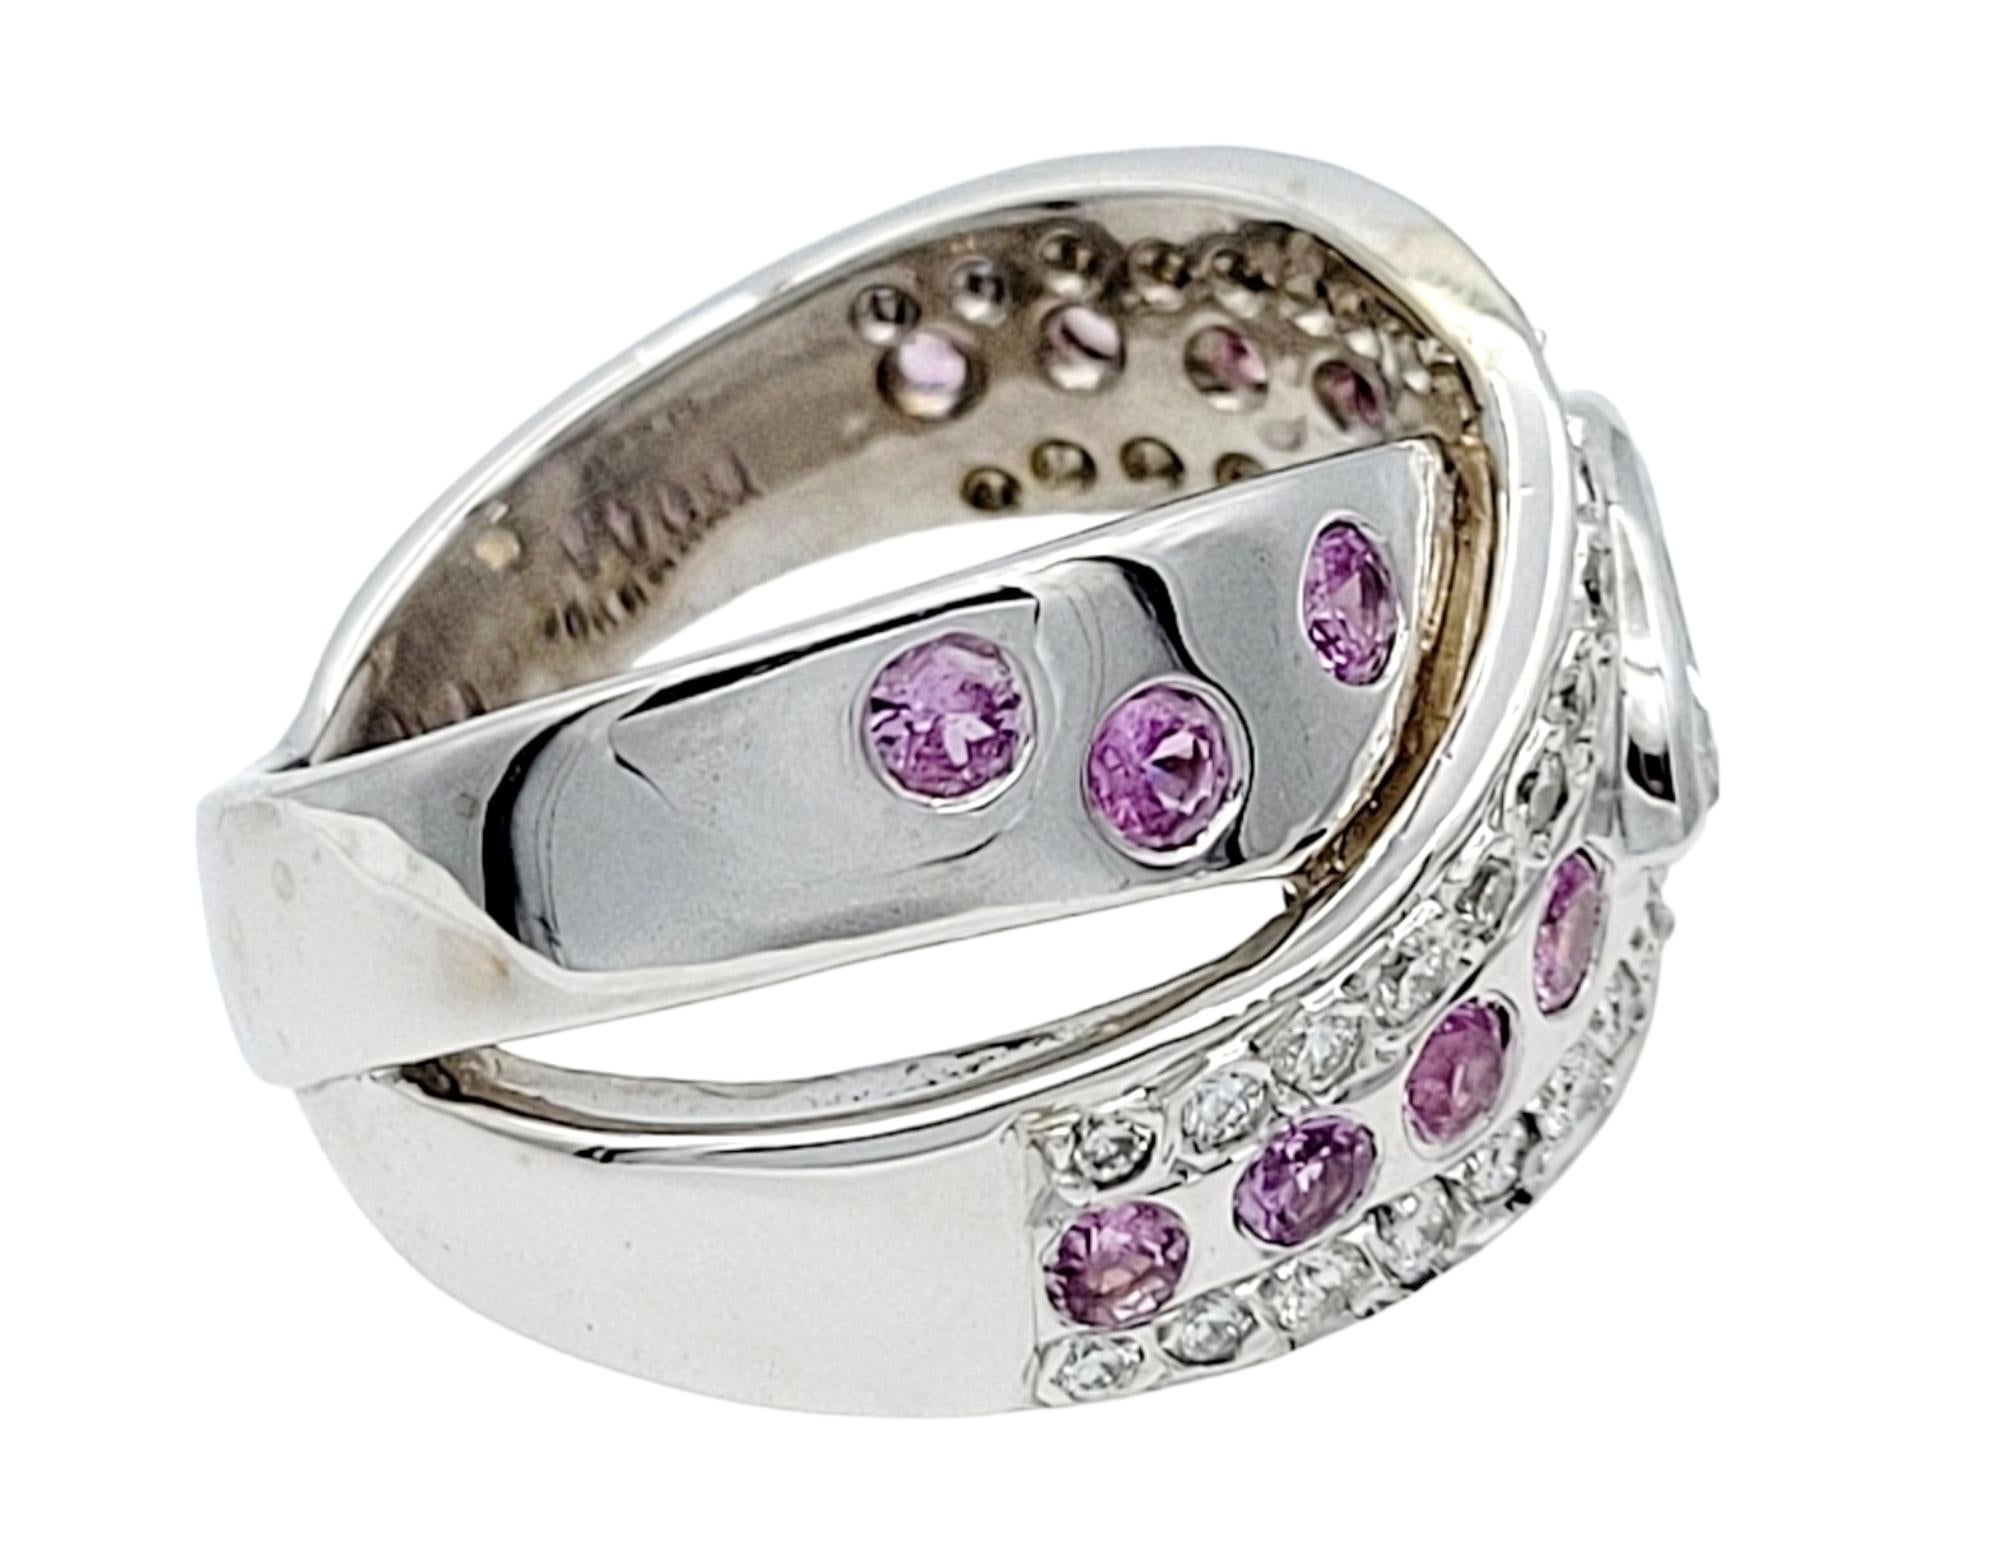 Ring Size: 7.5

This stunning 14 karat white gold crossover ring showcases a mesmerizing blend of diamonds and natural pink sapphires. The captivating centerpiece features a 0.47-carat marquise cut diamond, boasting a sparkling G color and SI-2